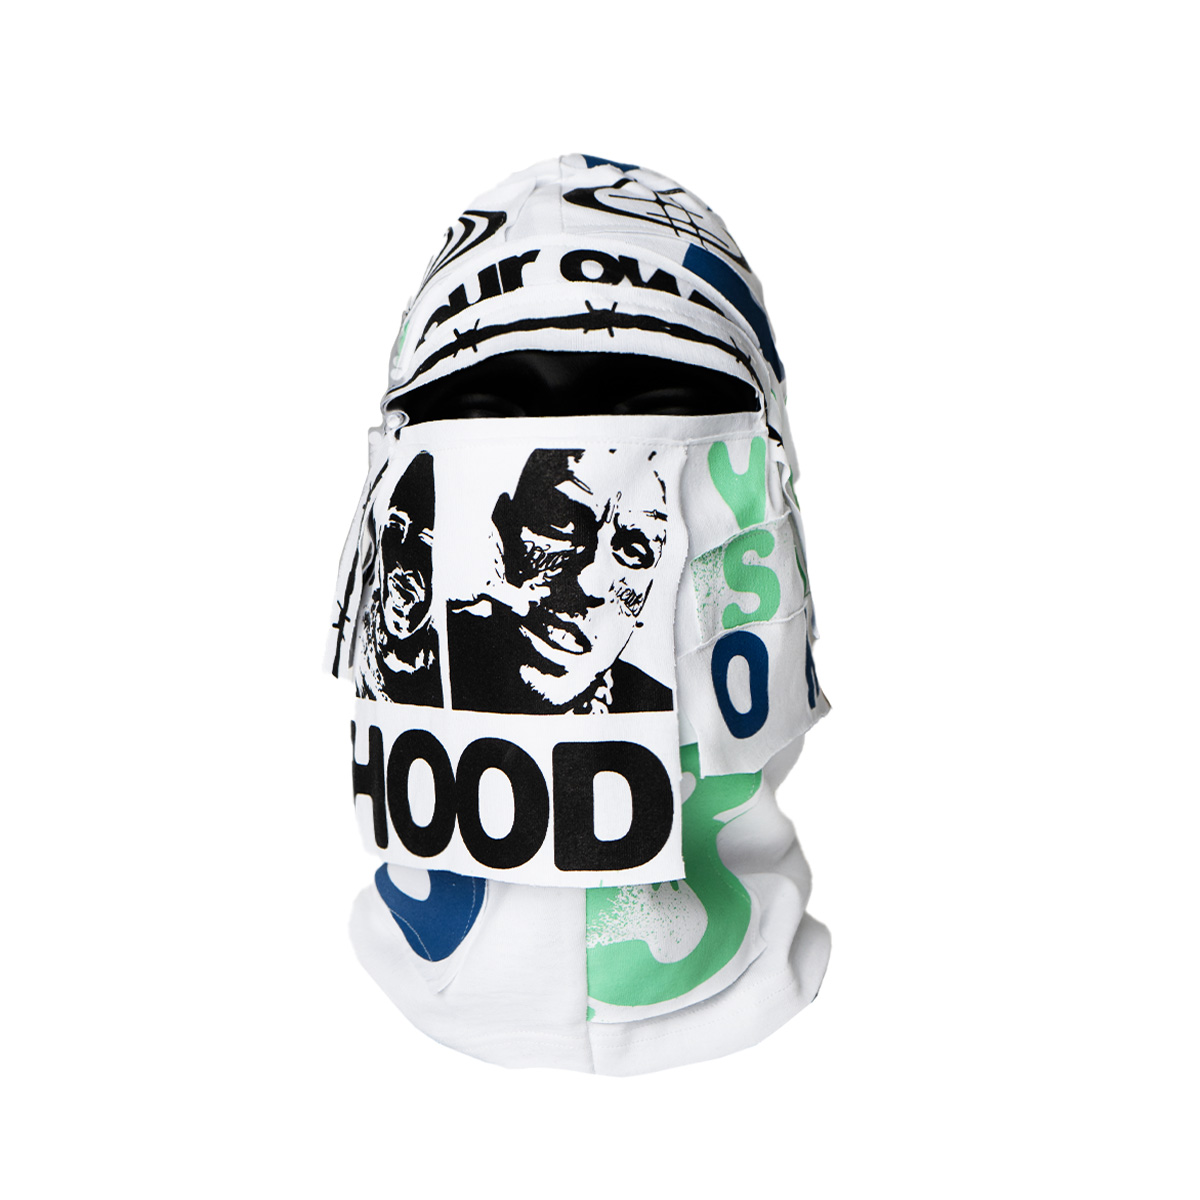 No-Face Recycled Mask - White/Blue